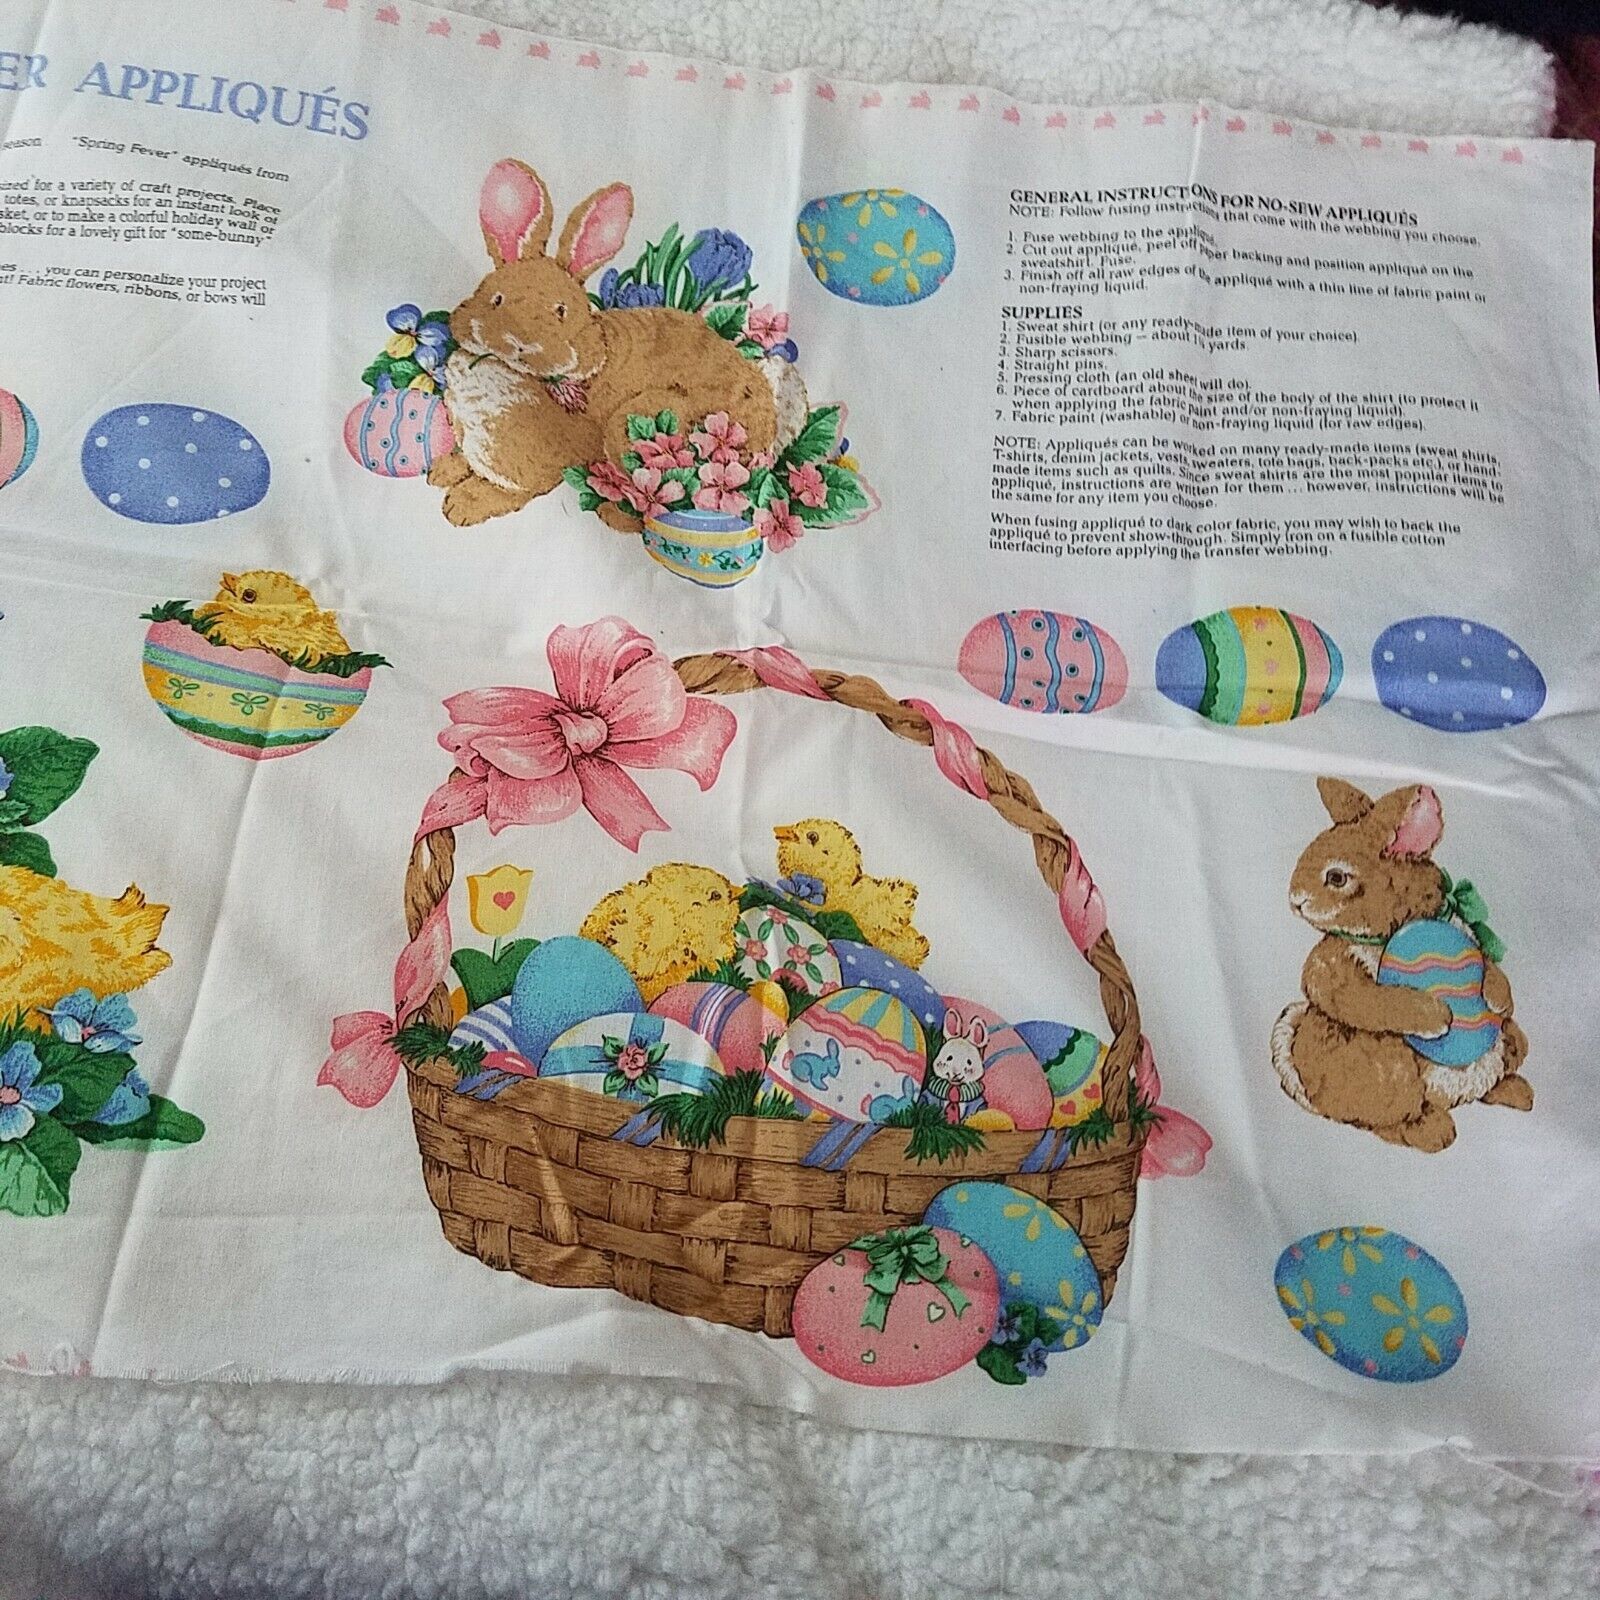 Cranston Print Works Spring Fever Applique Printed Fabric Pattern Instructions - $15.00